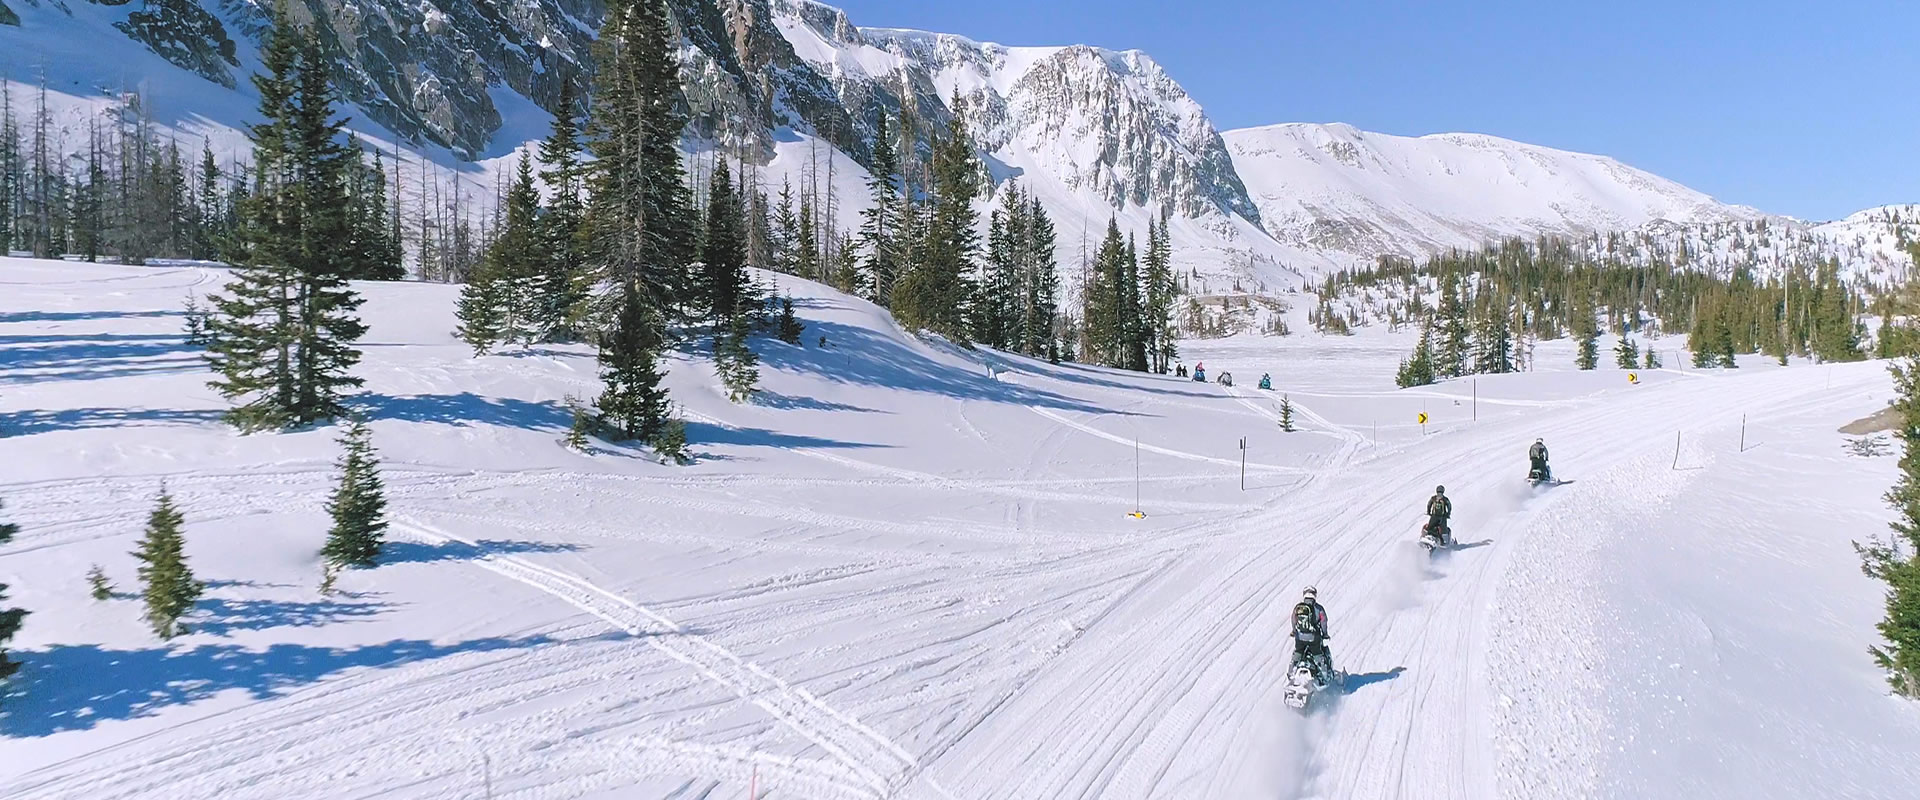 Winter Recreation in the Snowy Range of Wyoming